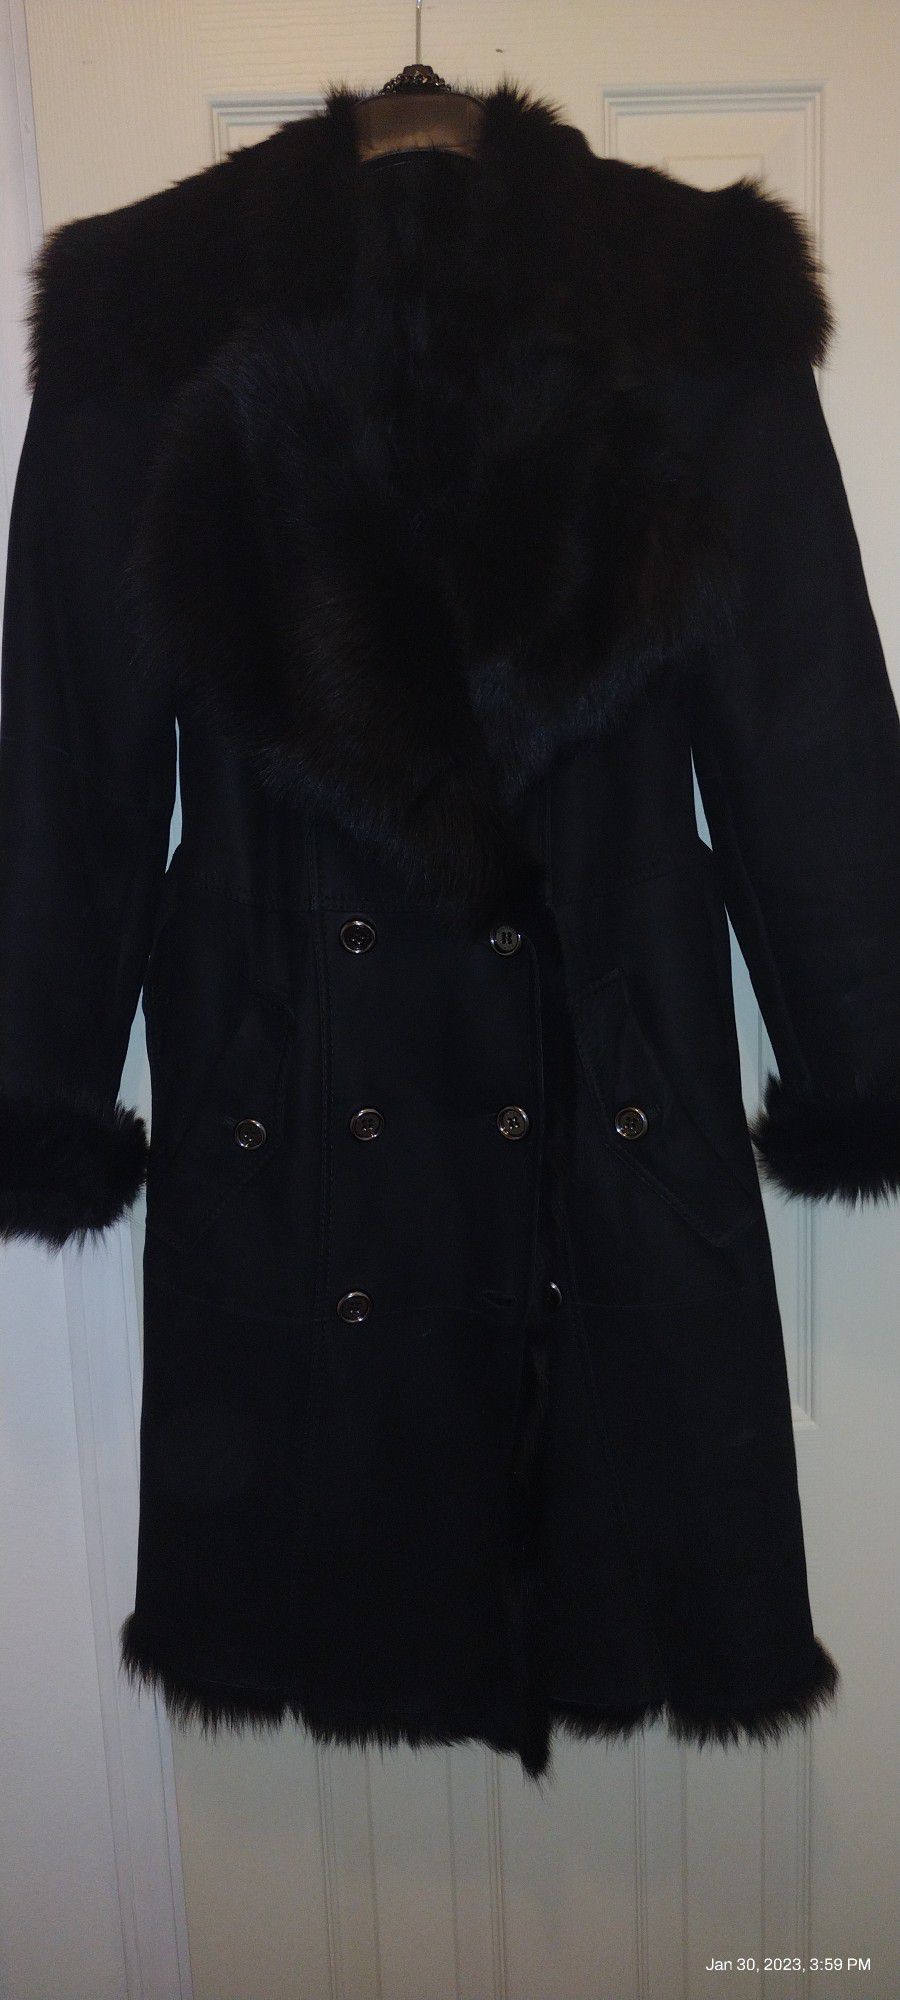 Burberry 'Tolladine' Black Shearling Trench Coat  MSRP US : $3,495  